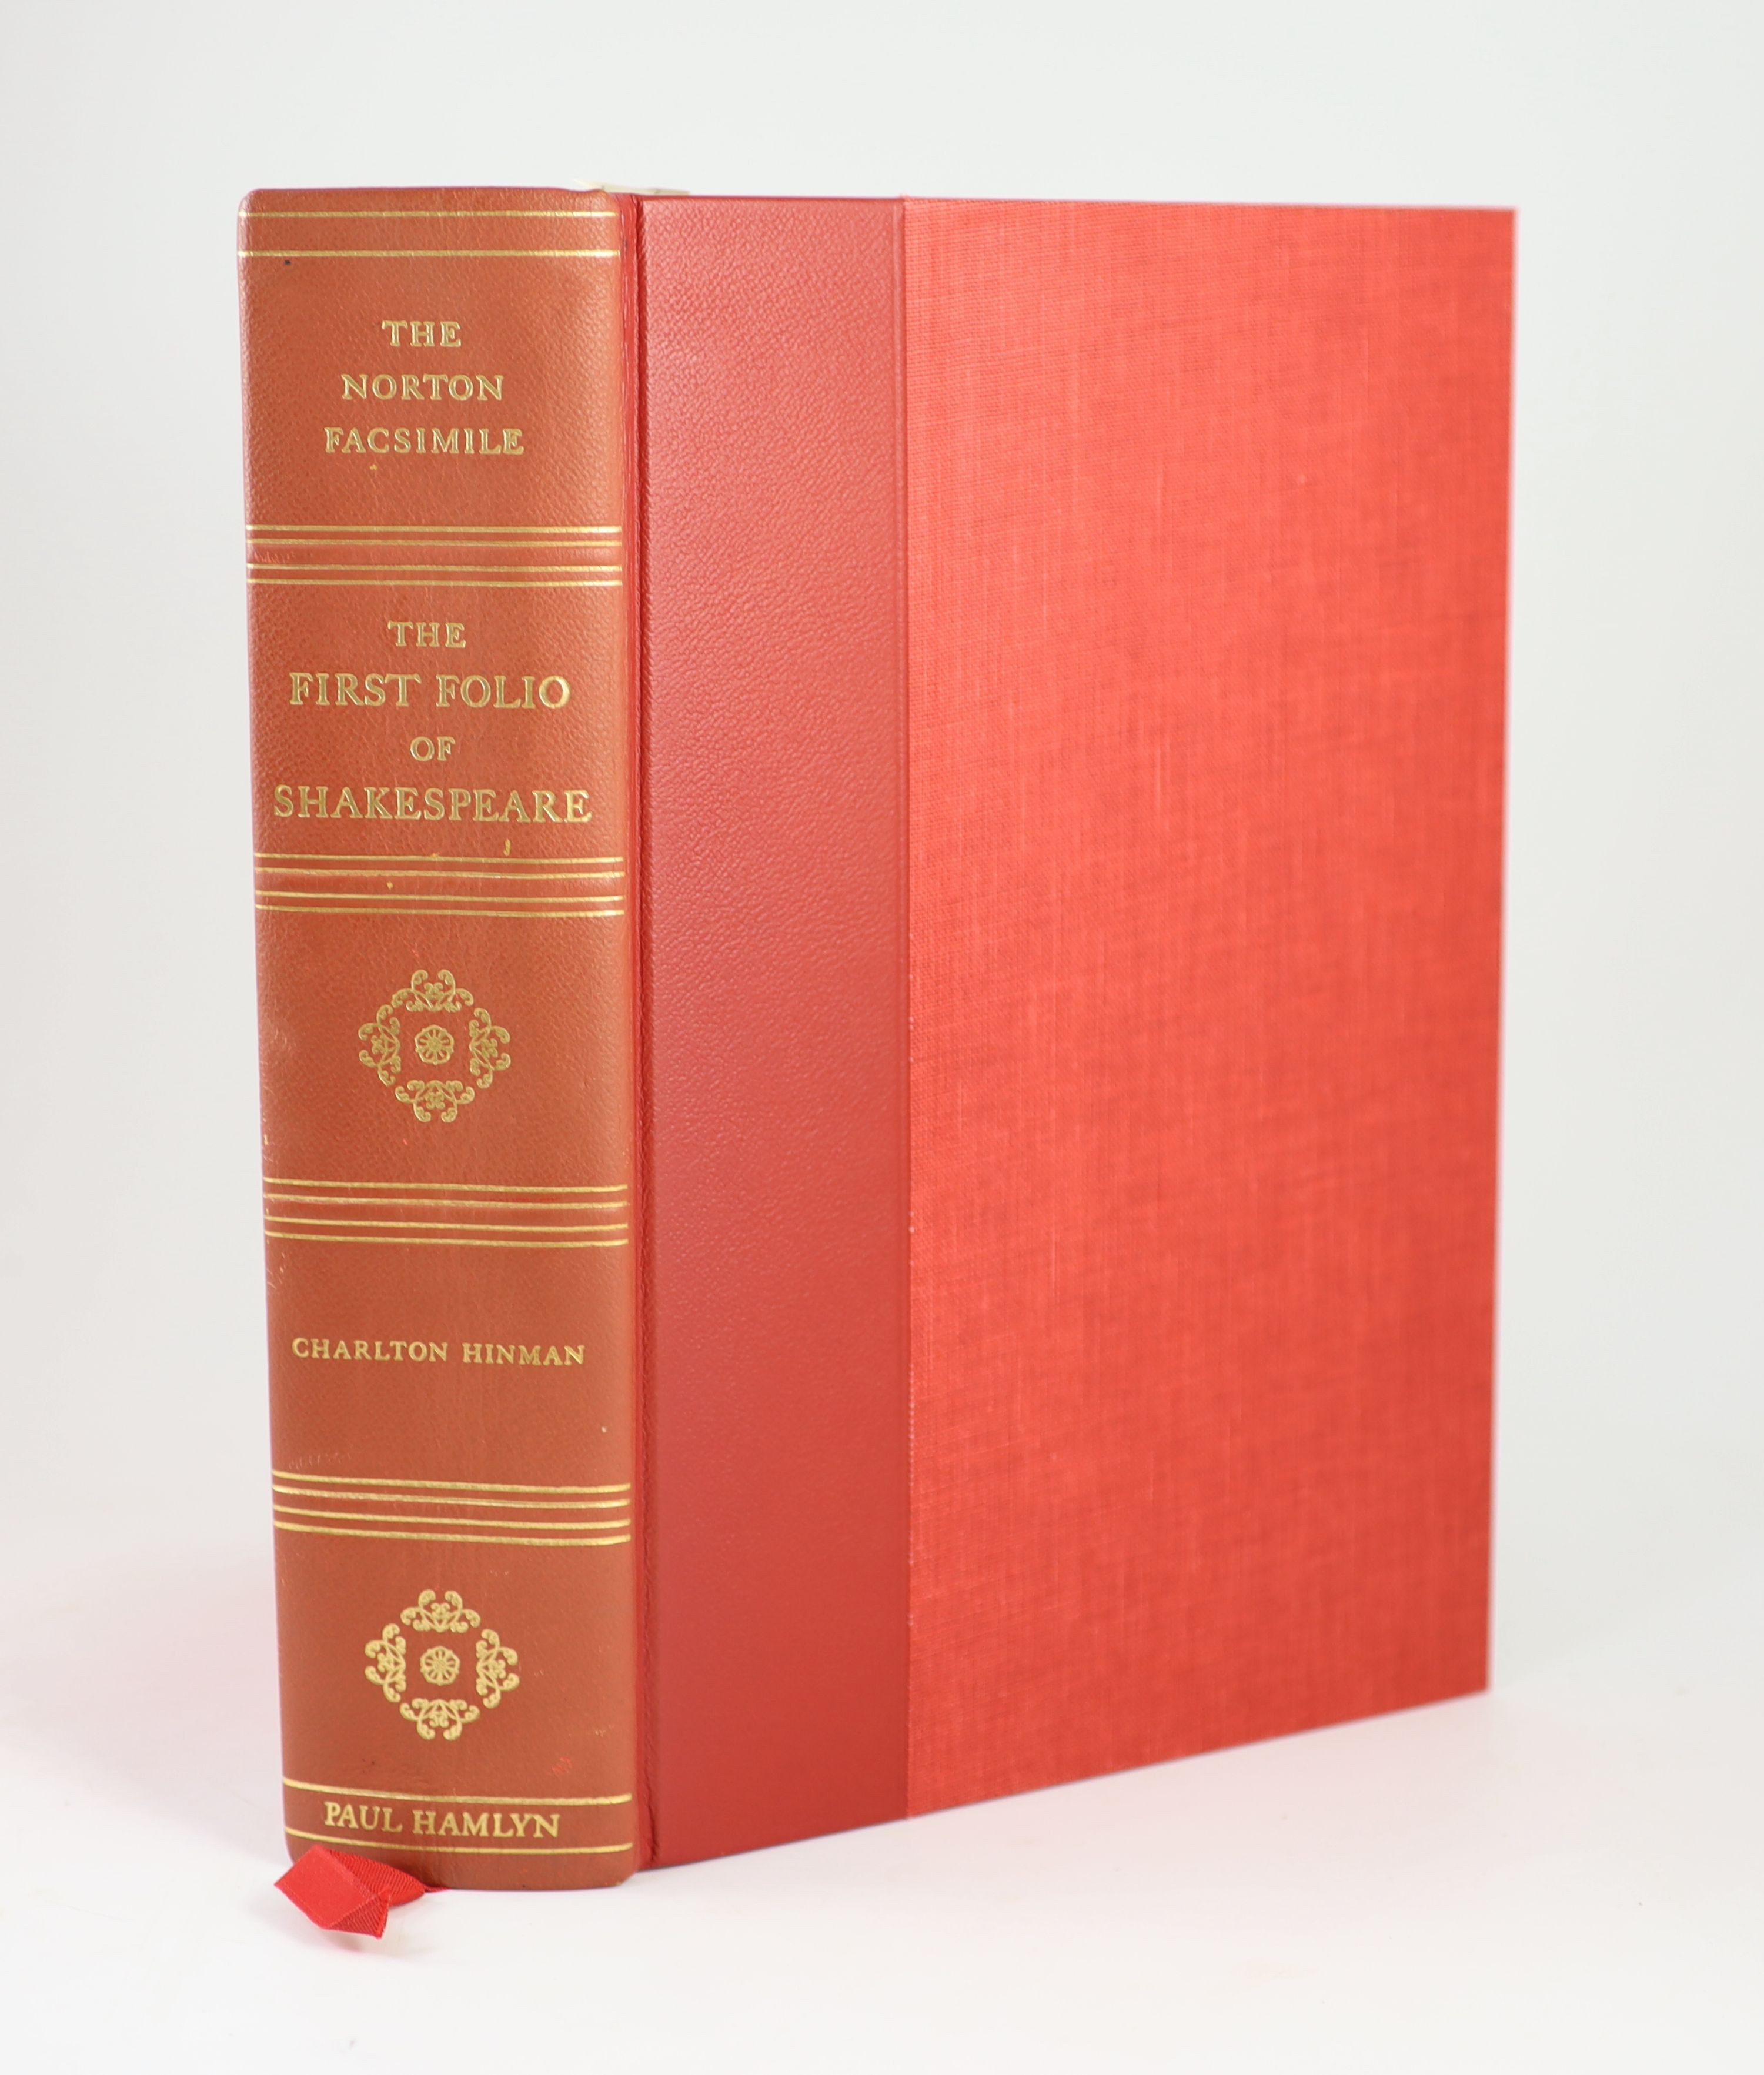 Shakespeare, William - The Norton Facsimile: the First Folio of Shakespeare. Prepared by Charlton Hinman. red morocco-backed buckram, gilt spine & top, patterned e/ps., in slipcase, thick folio. Paul Hamlyn, 1968